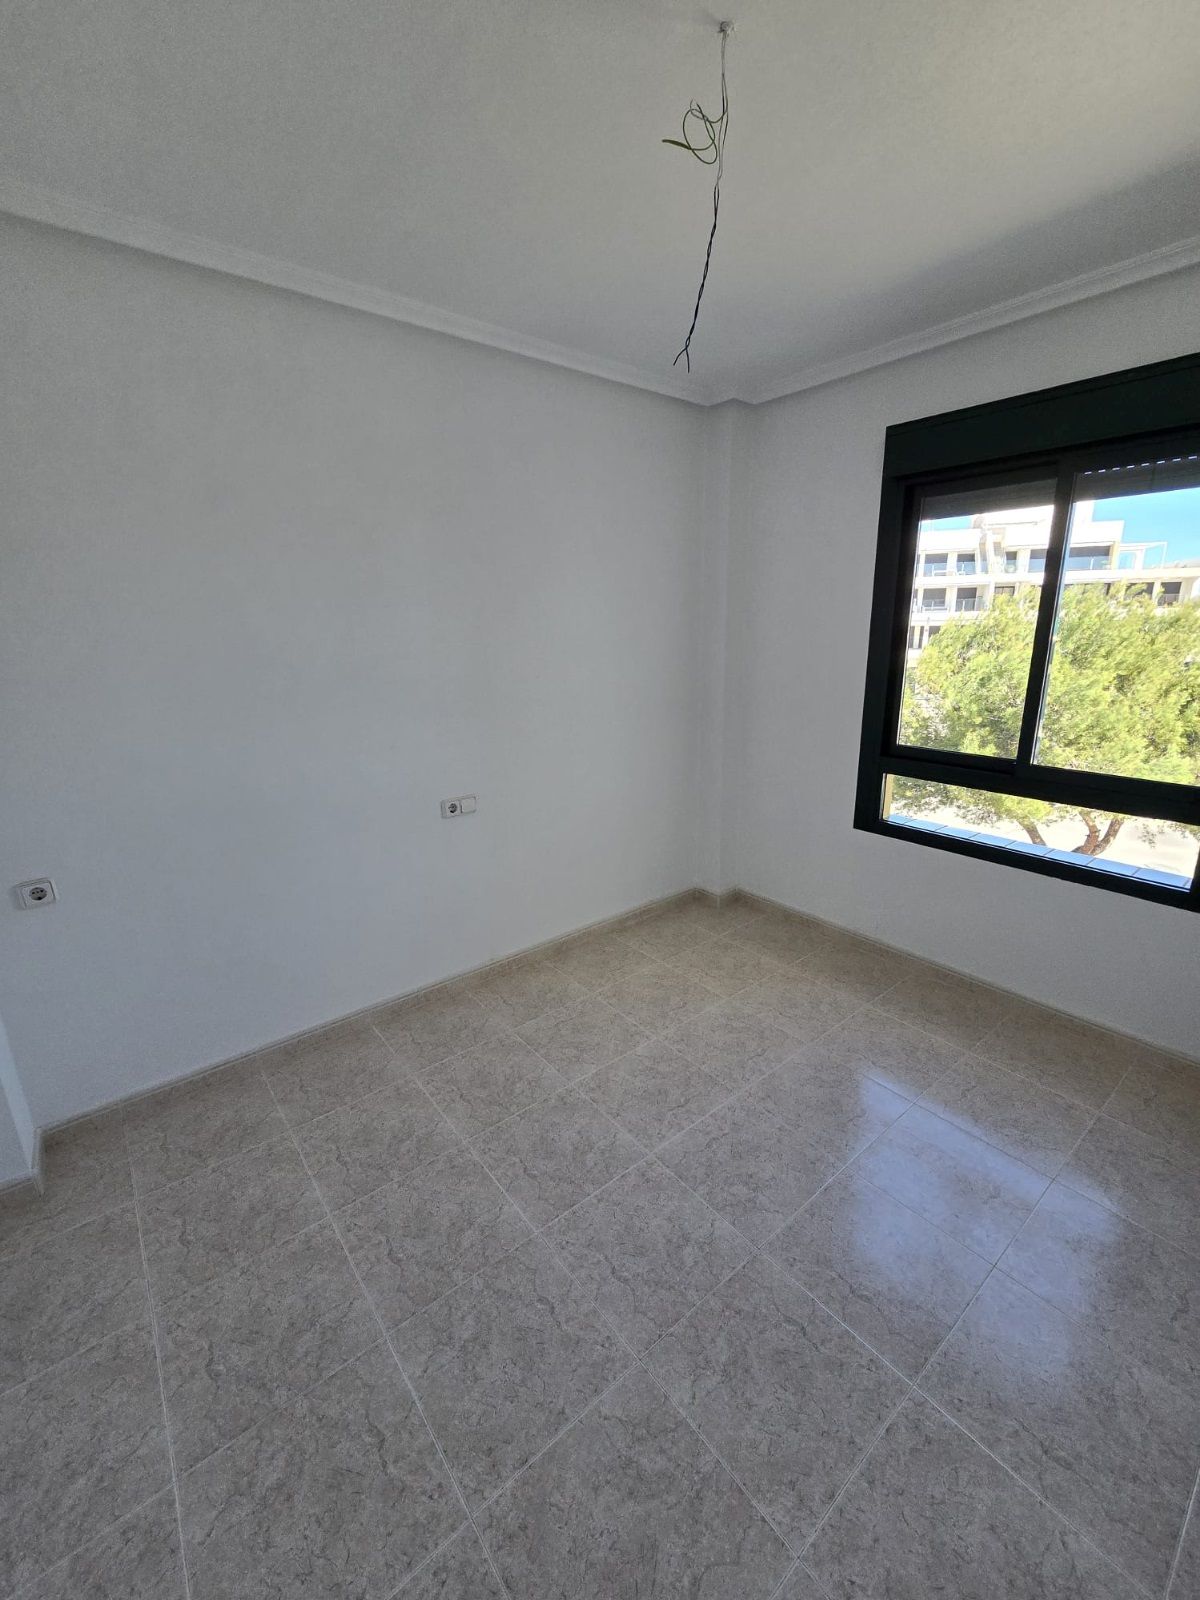 BRAND NEW APARTMENT IN CAMPOAMOR GOLF COURSE